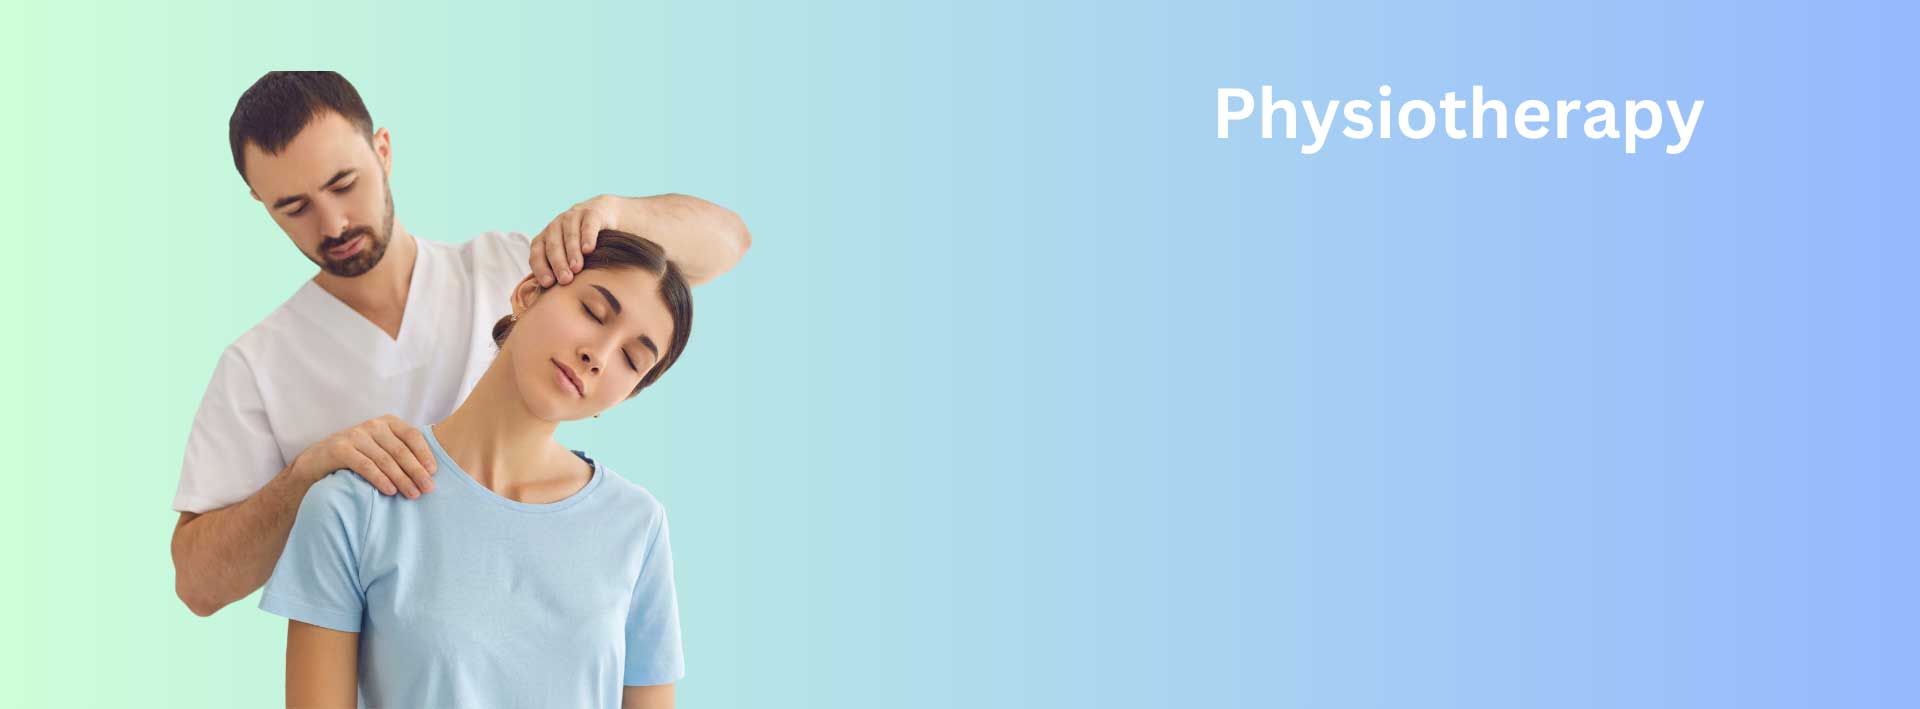 Physiotherapy Home Services in Dhaka